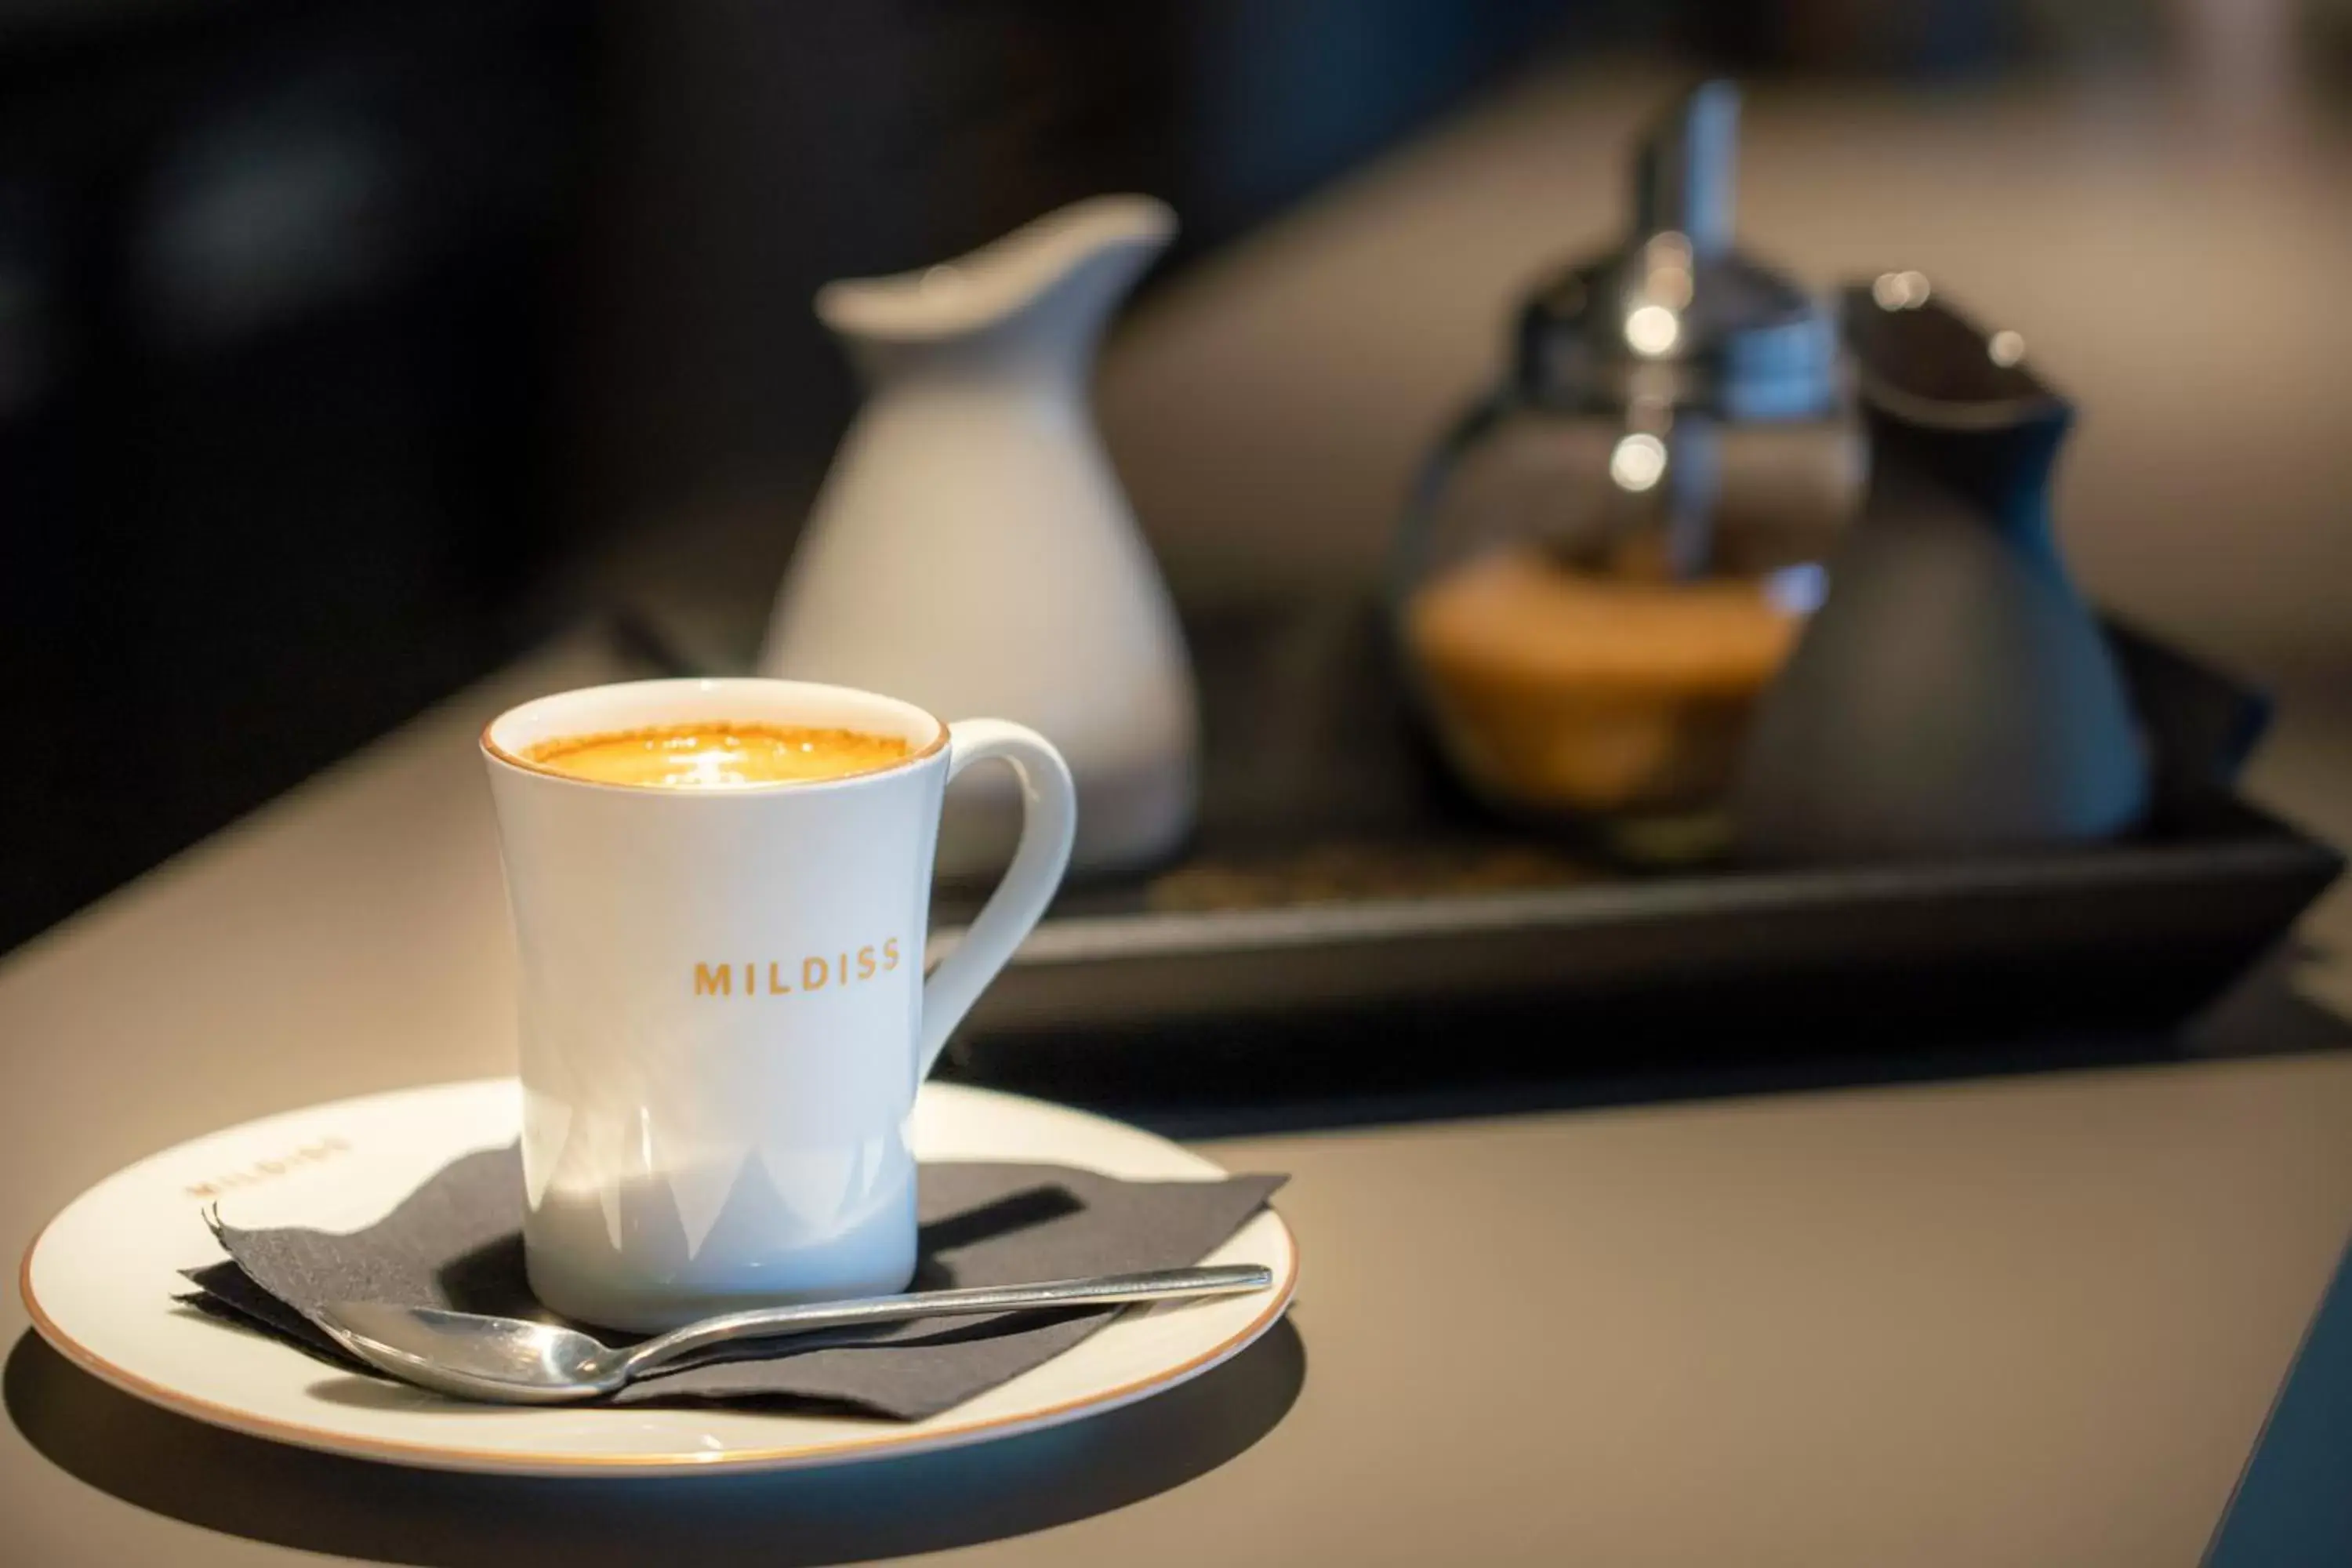 Breakfast, Drinks in Mildiss Hotel - BW Signature Collection